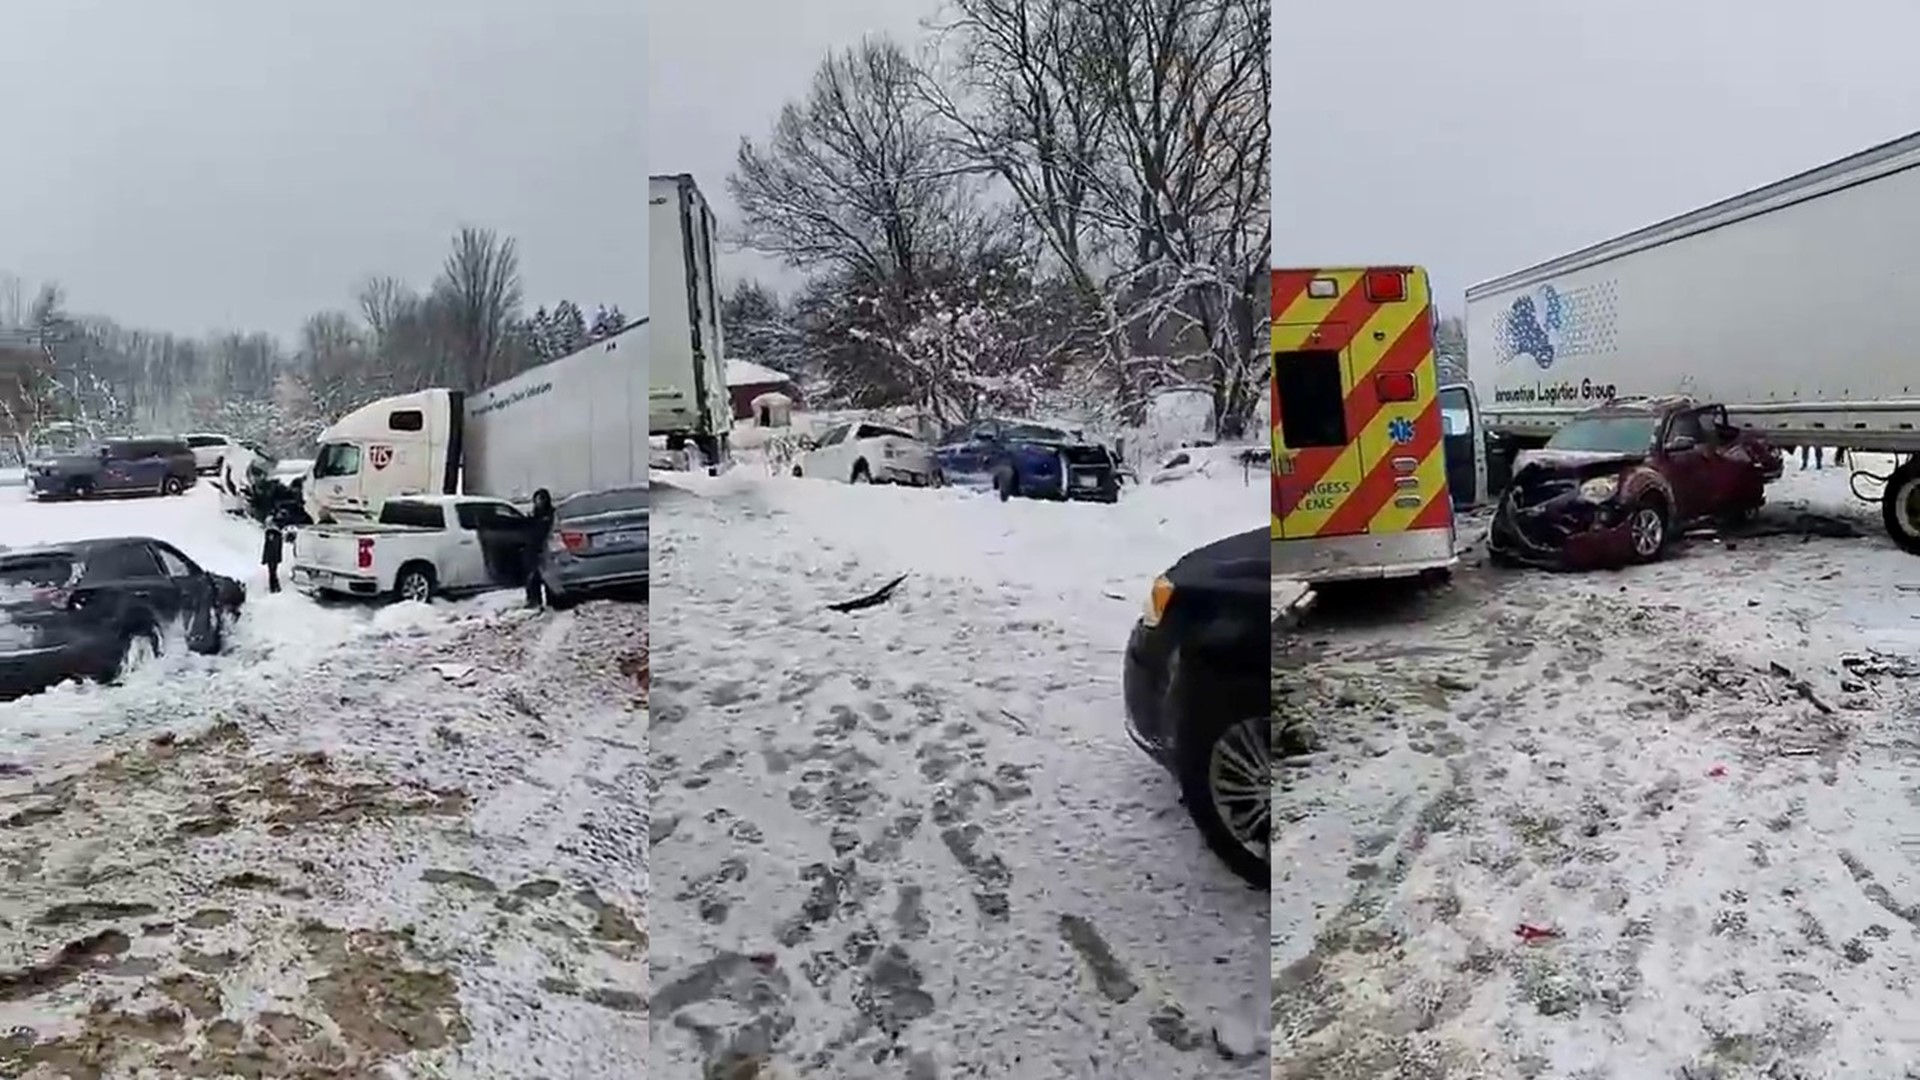 In Kalamazoo County, first responders are tending to a 20-car pileup on US 131 southbound from D Avenue.